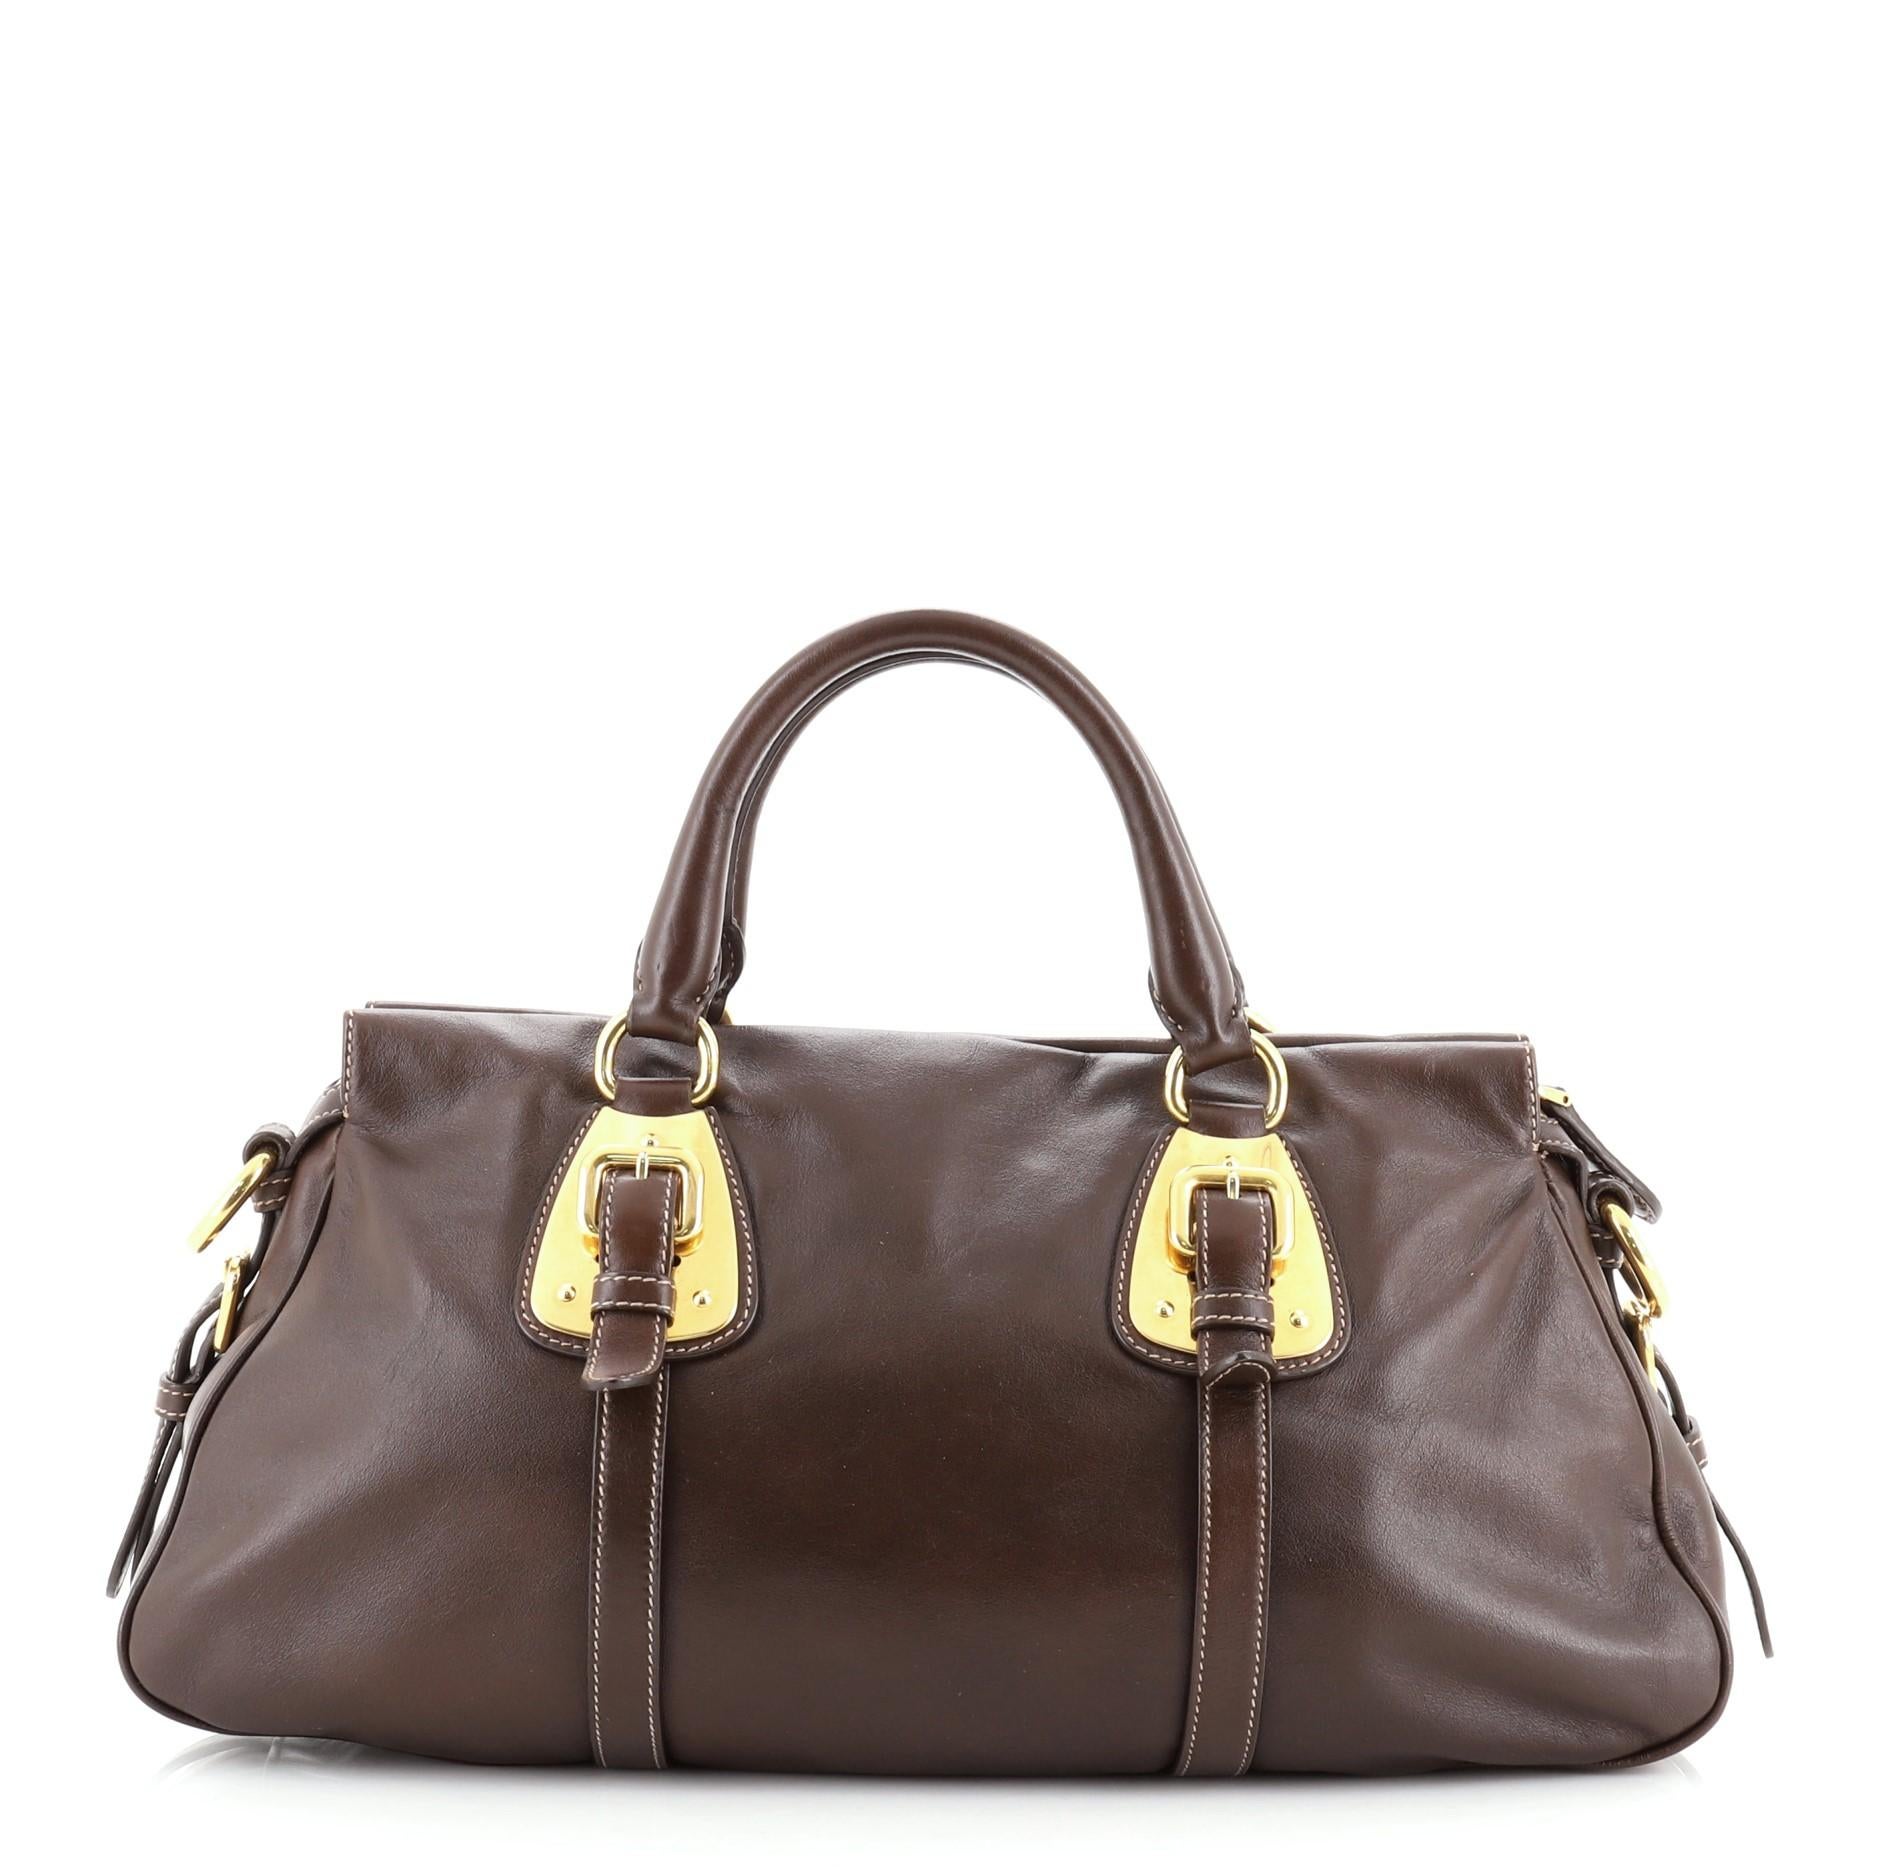 Prada Convertible Belted Satchel Soft Calf Medium
Brown

Condition Details: Creasing, wear and scuffs on exterior, handles and interior opening trim, small indentations on handle bases. Scratches, discoloration and slight tarnish on